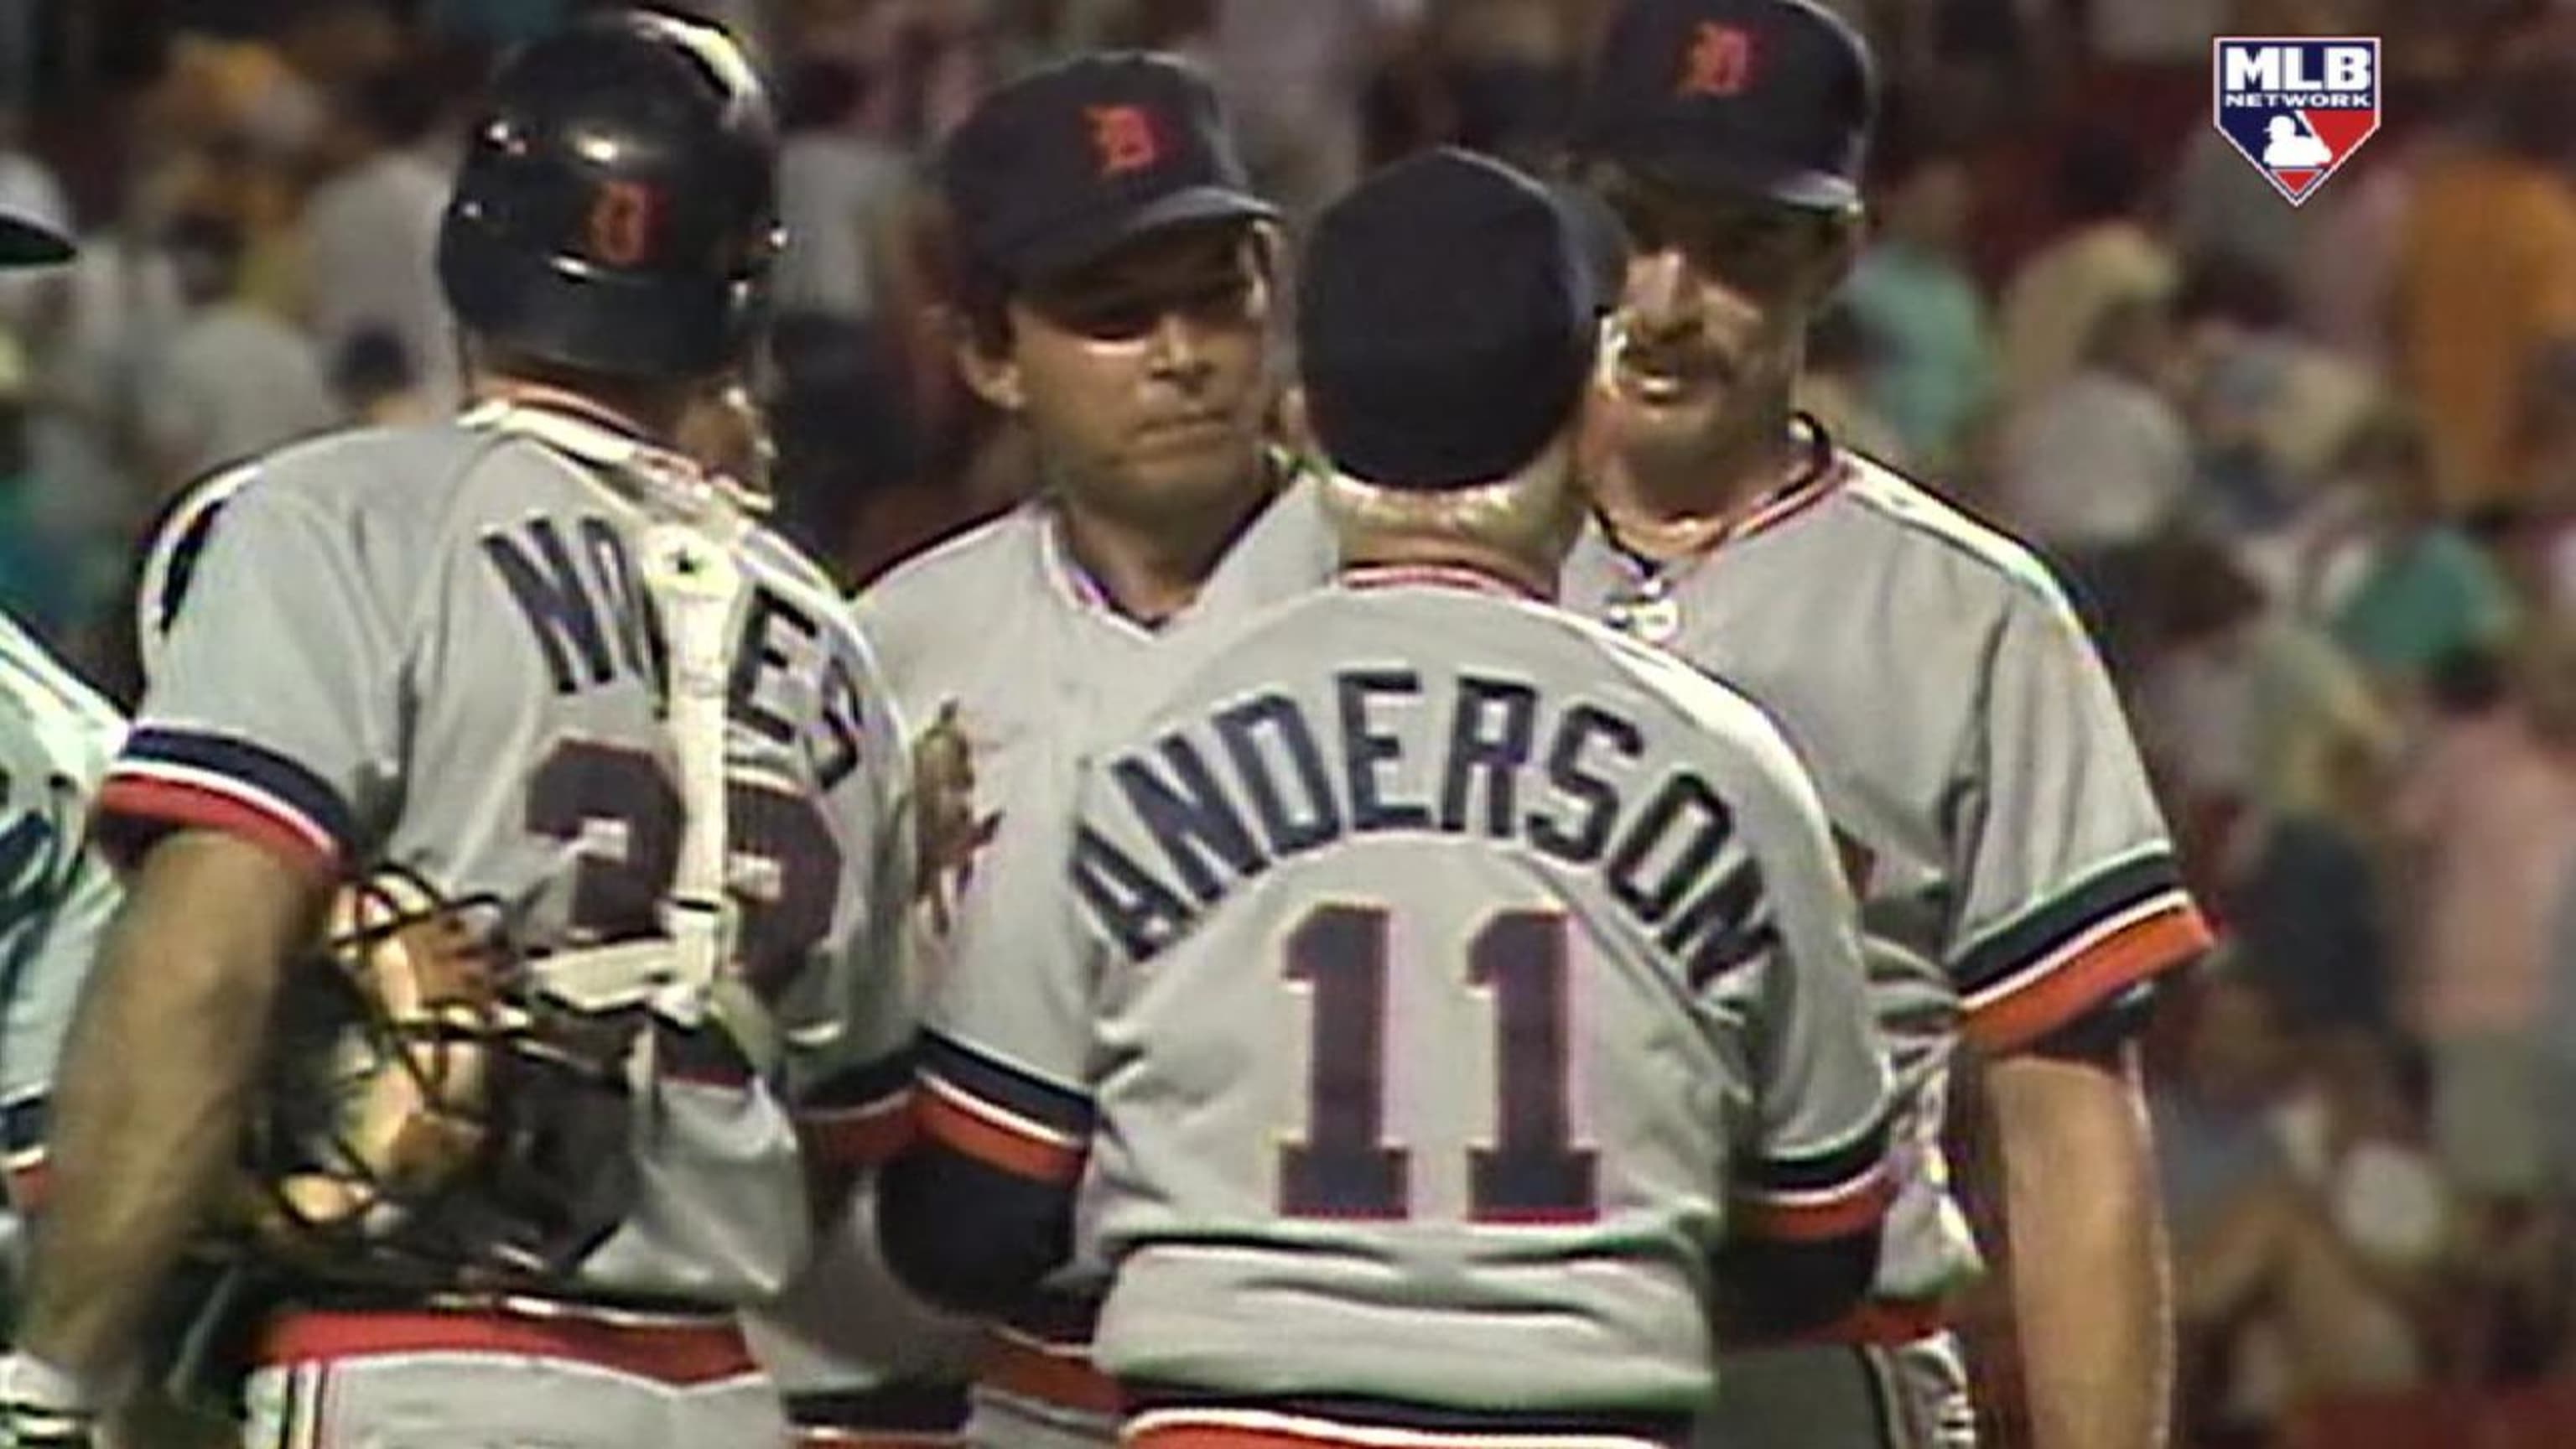 Leadership Lessons from Sparky Anderson - The Kevin Eikenberry Group